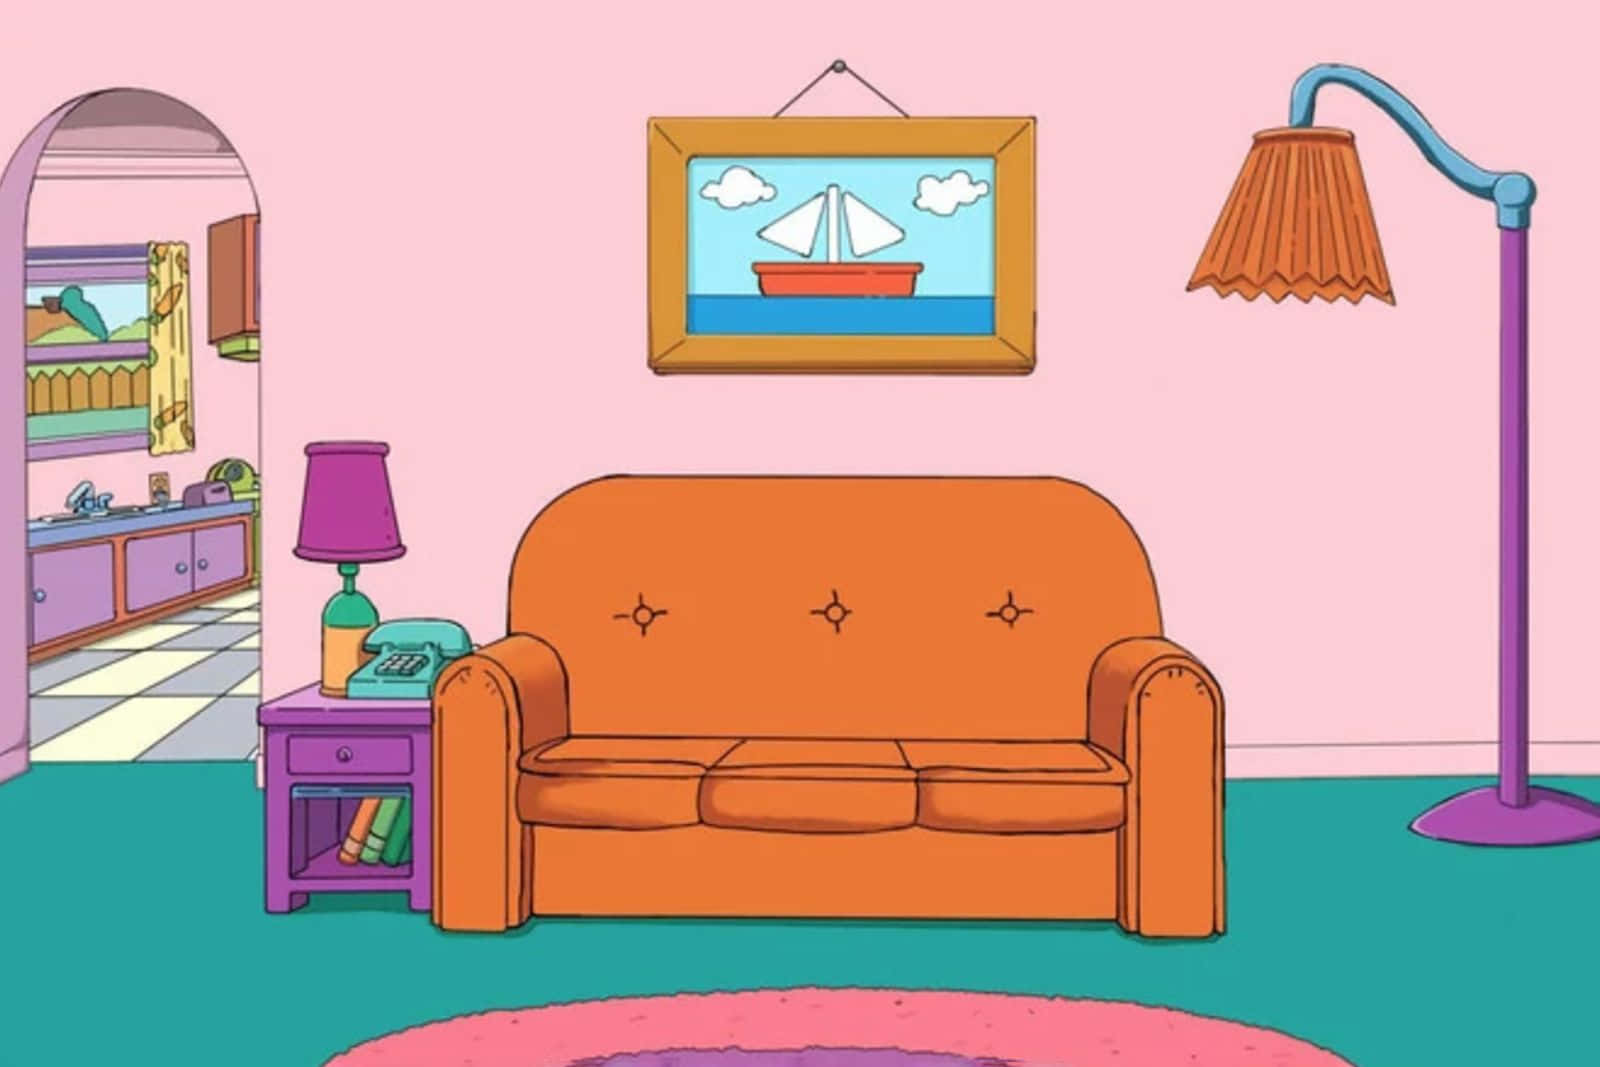 A Cartoon Room With A Couch And A Lamp